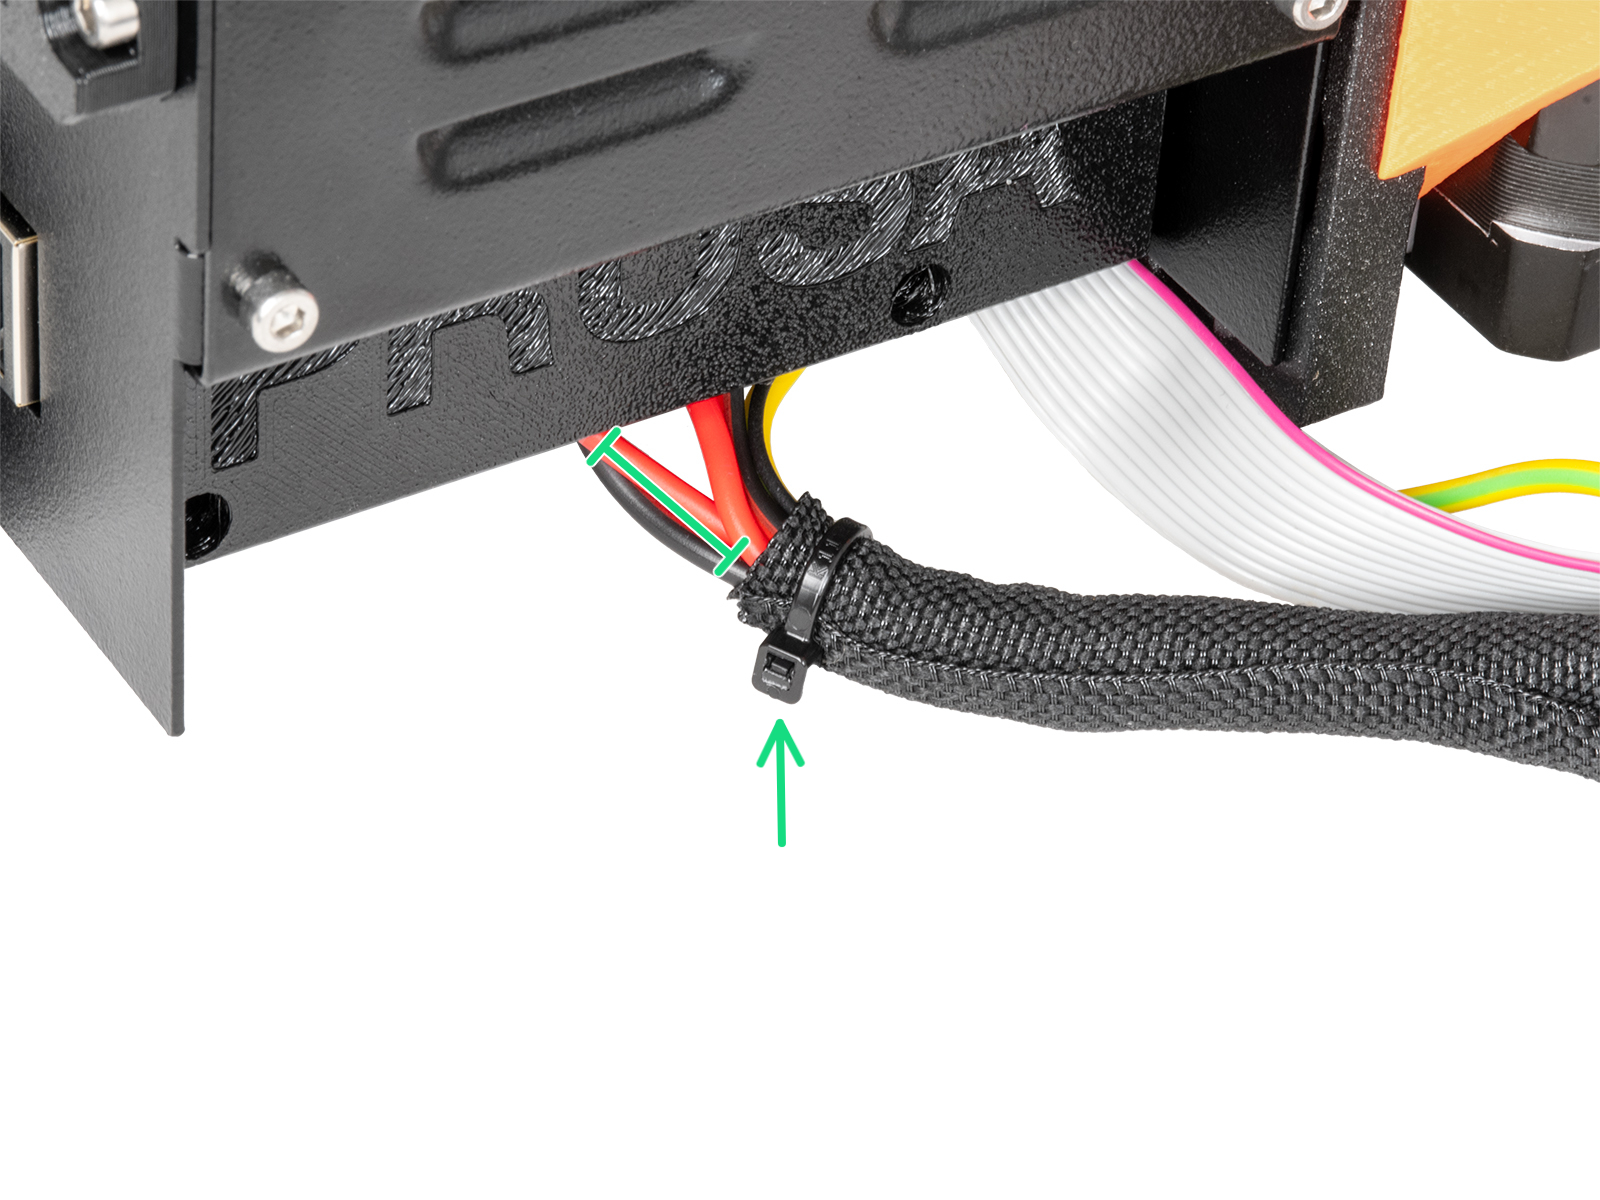 Covering the quick release cable